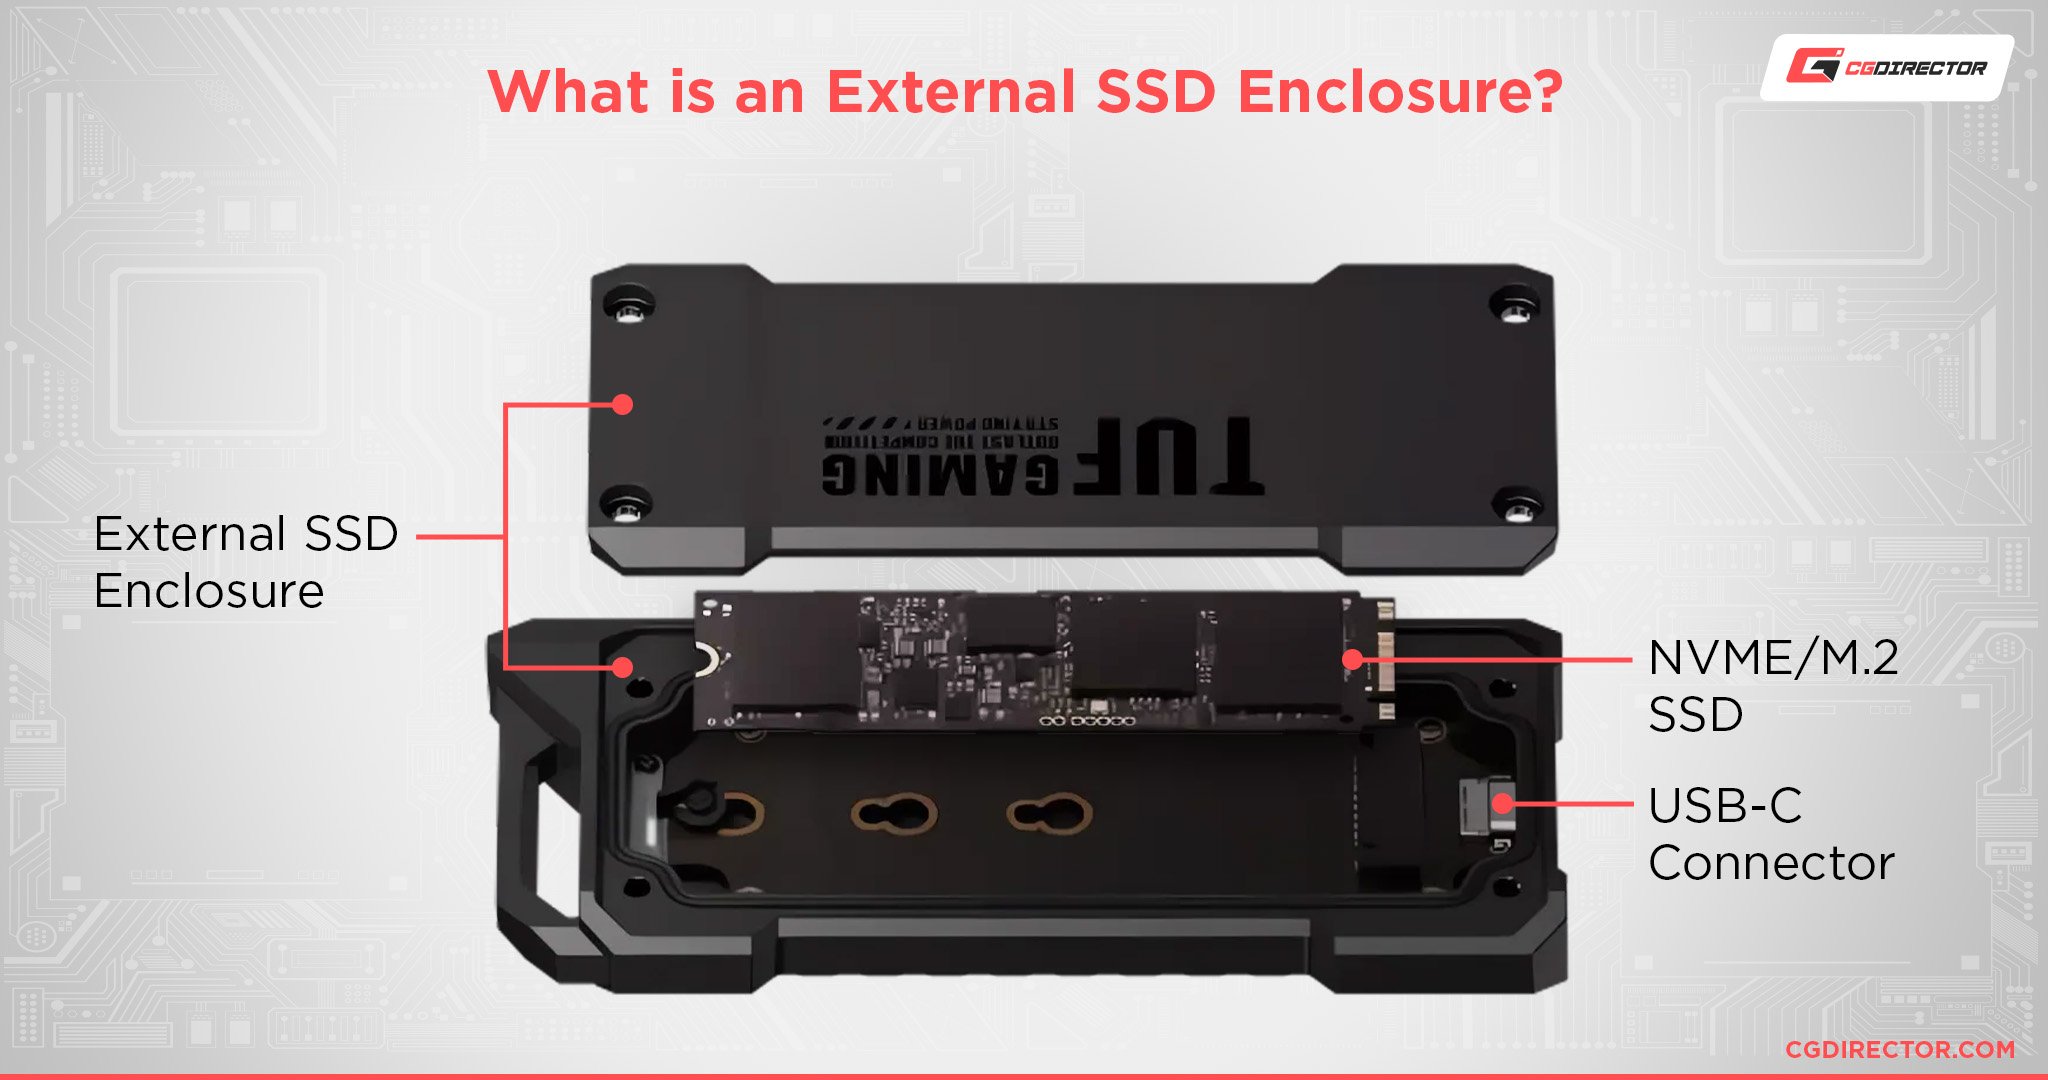 What is an External SSD Enclosure